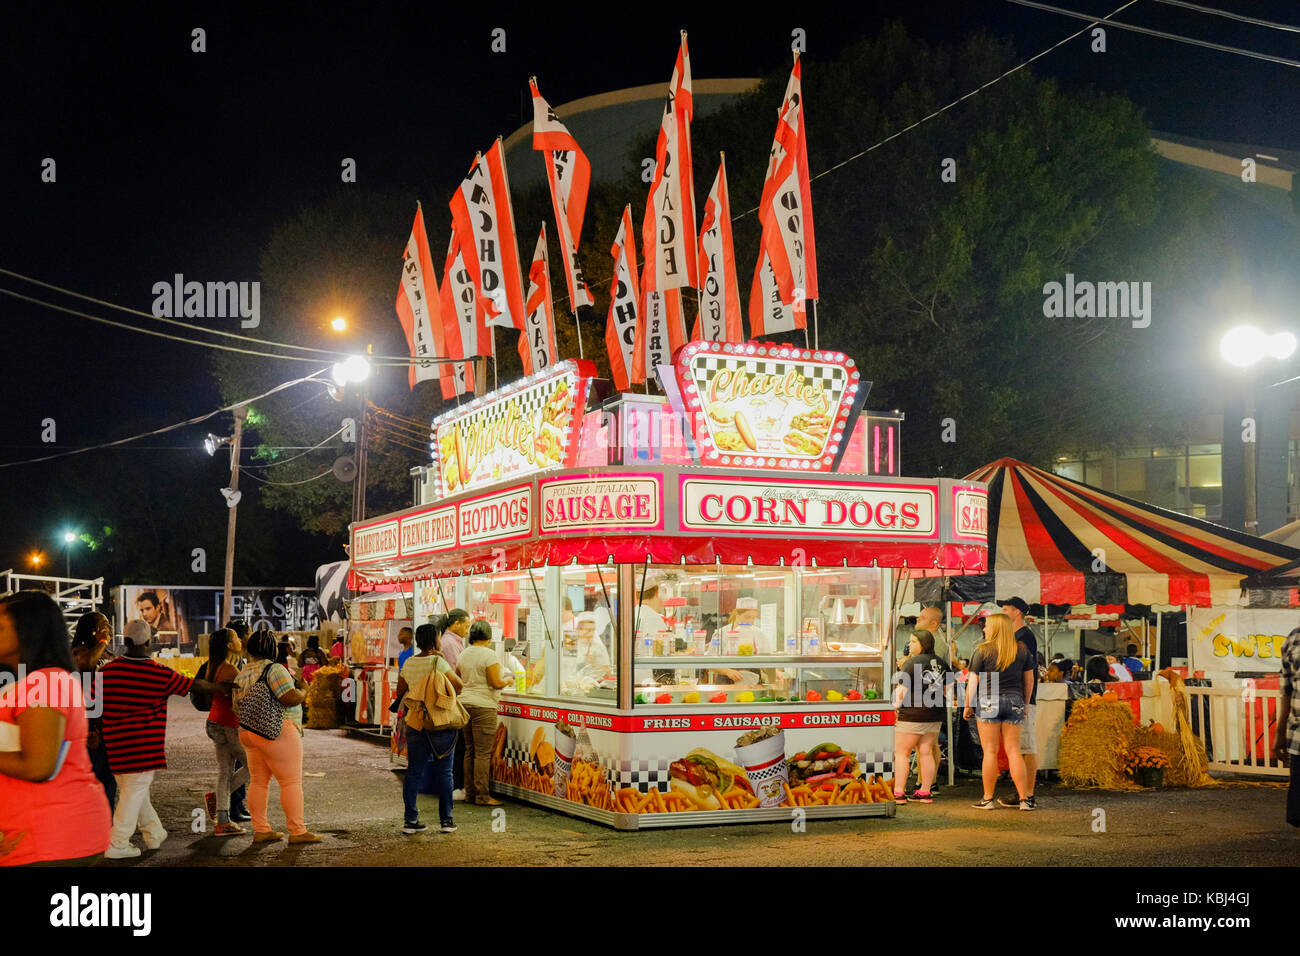 Carnival food vendor booth on the midway at the Alabama National Fair which is similar to a state fair, in Montgomery, Alabama, USA. Stock Photo